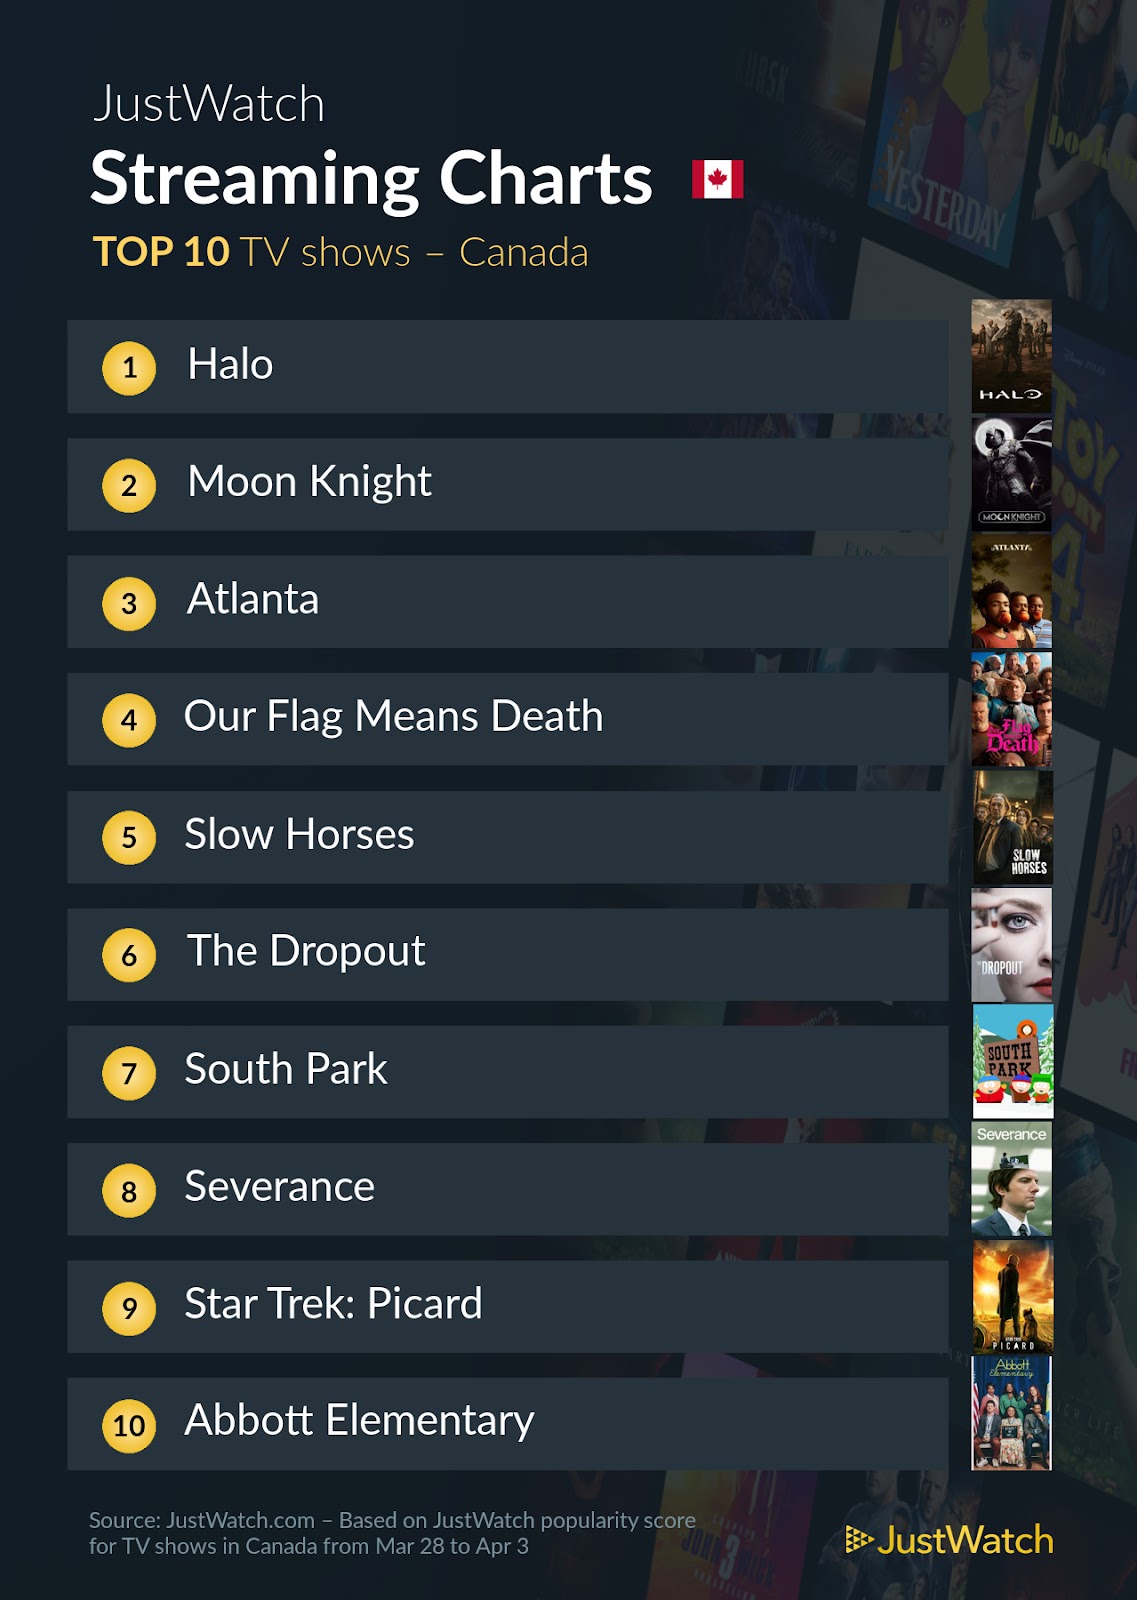 halo coda moon knight canada top streaming charts most popular movies TV shows right now